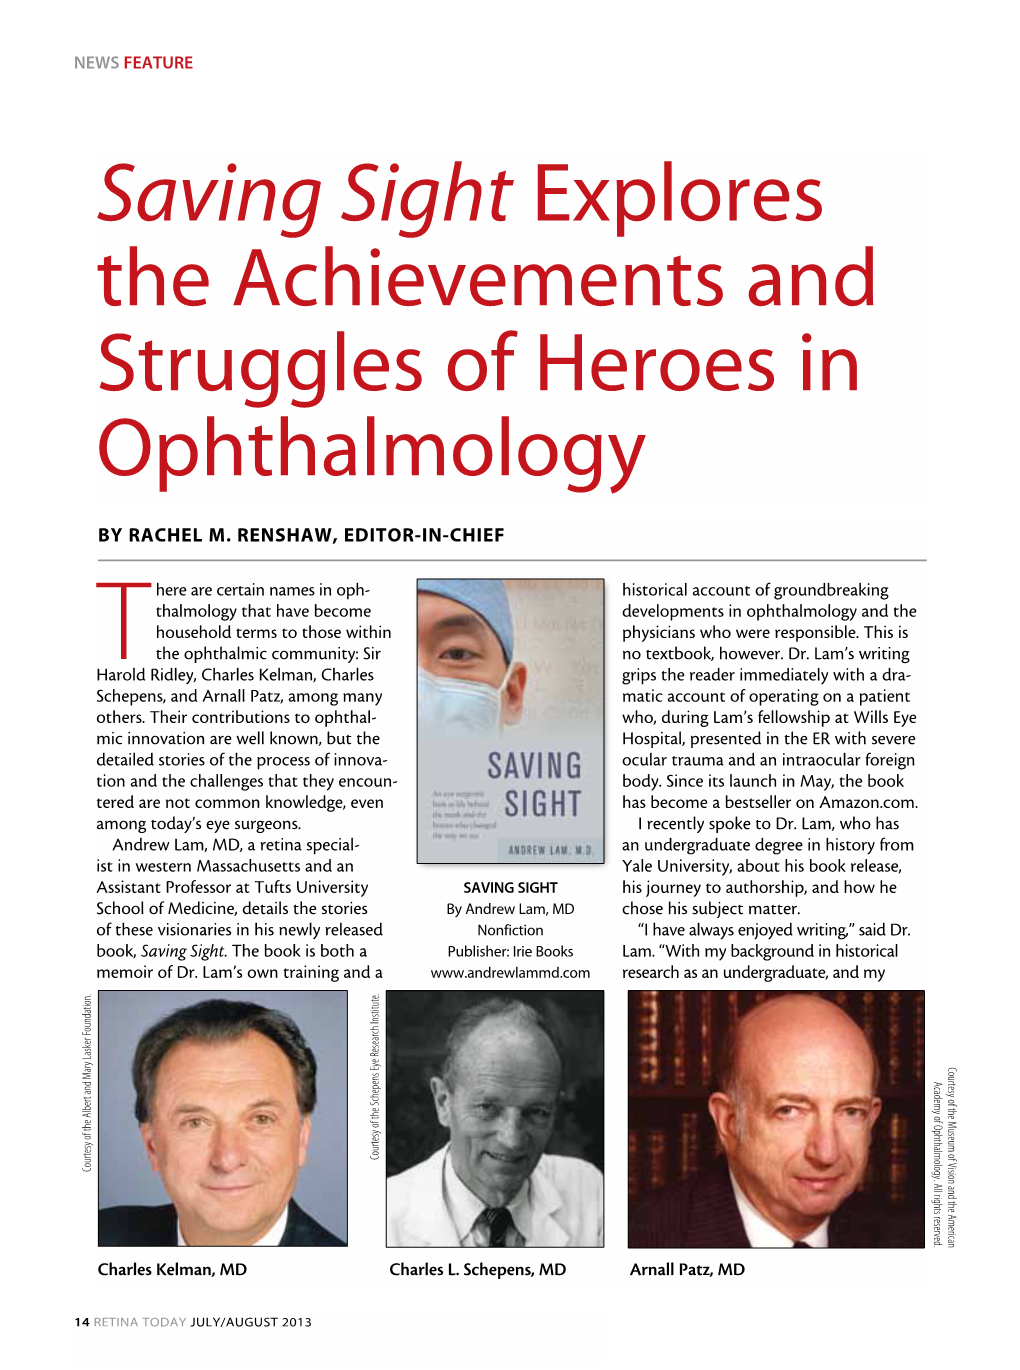 Saving Sight Explores the Achievements and Struggles of Heroes in Ophthalmology